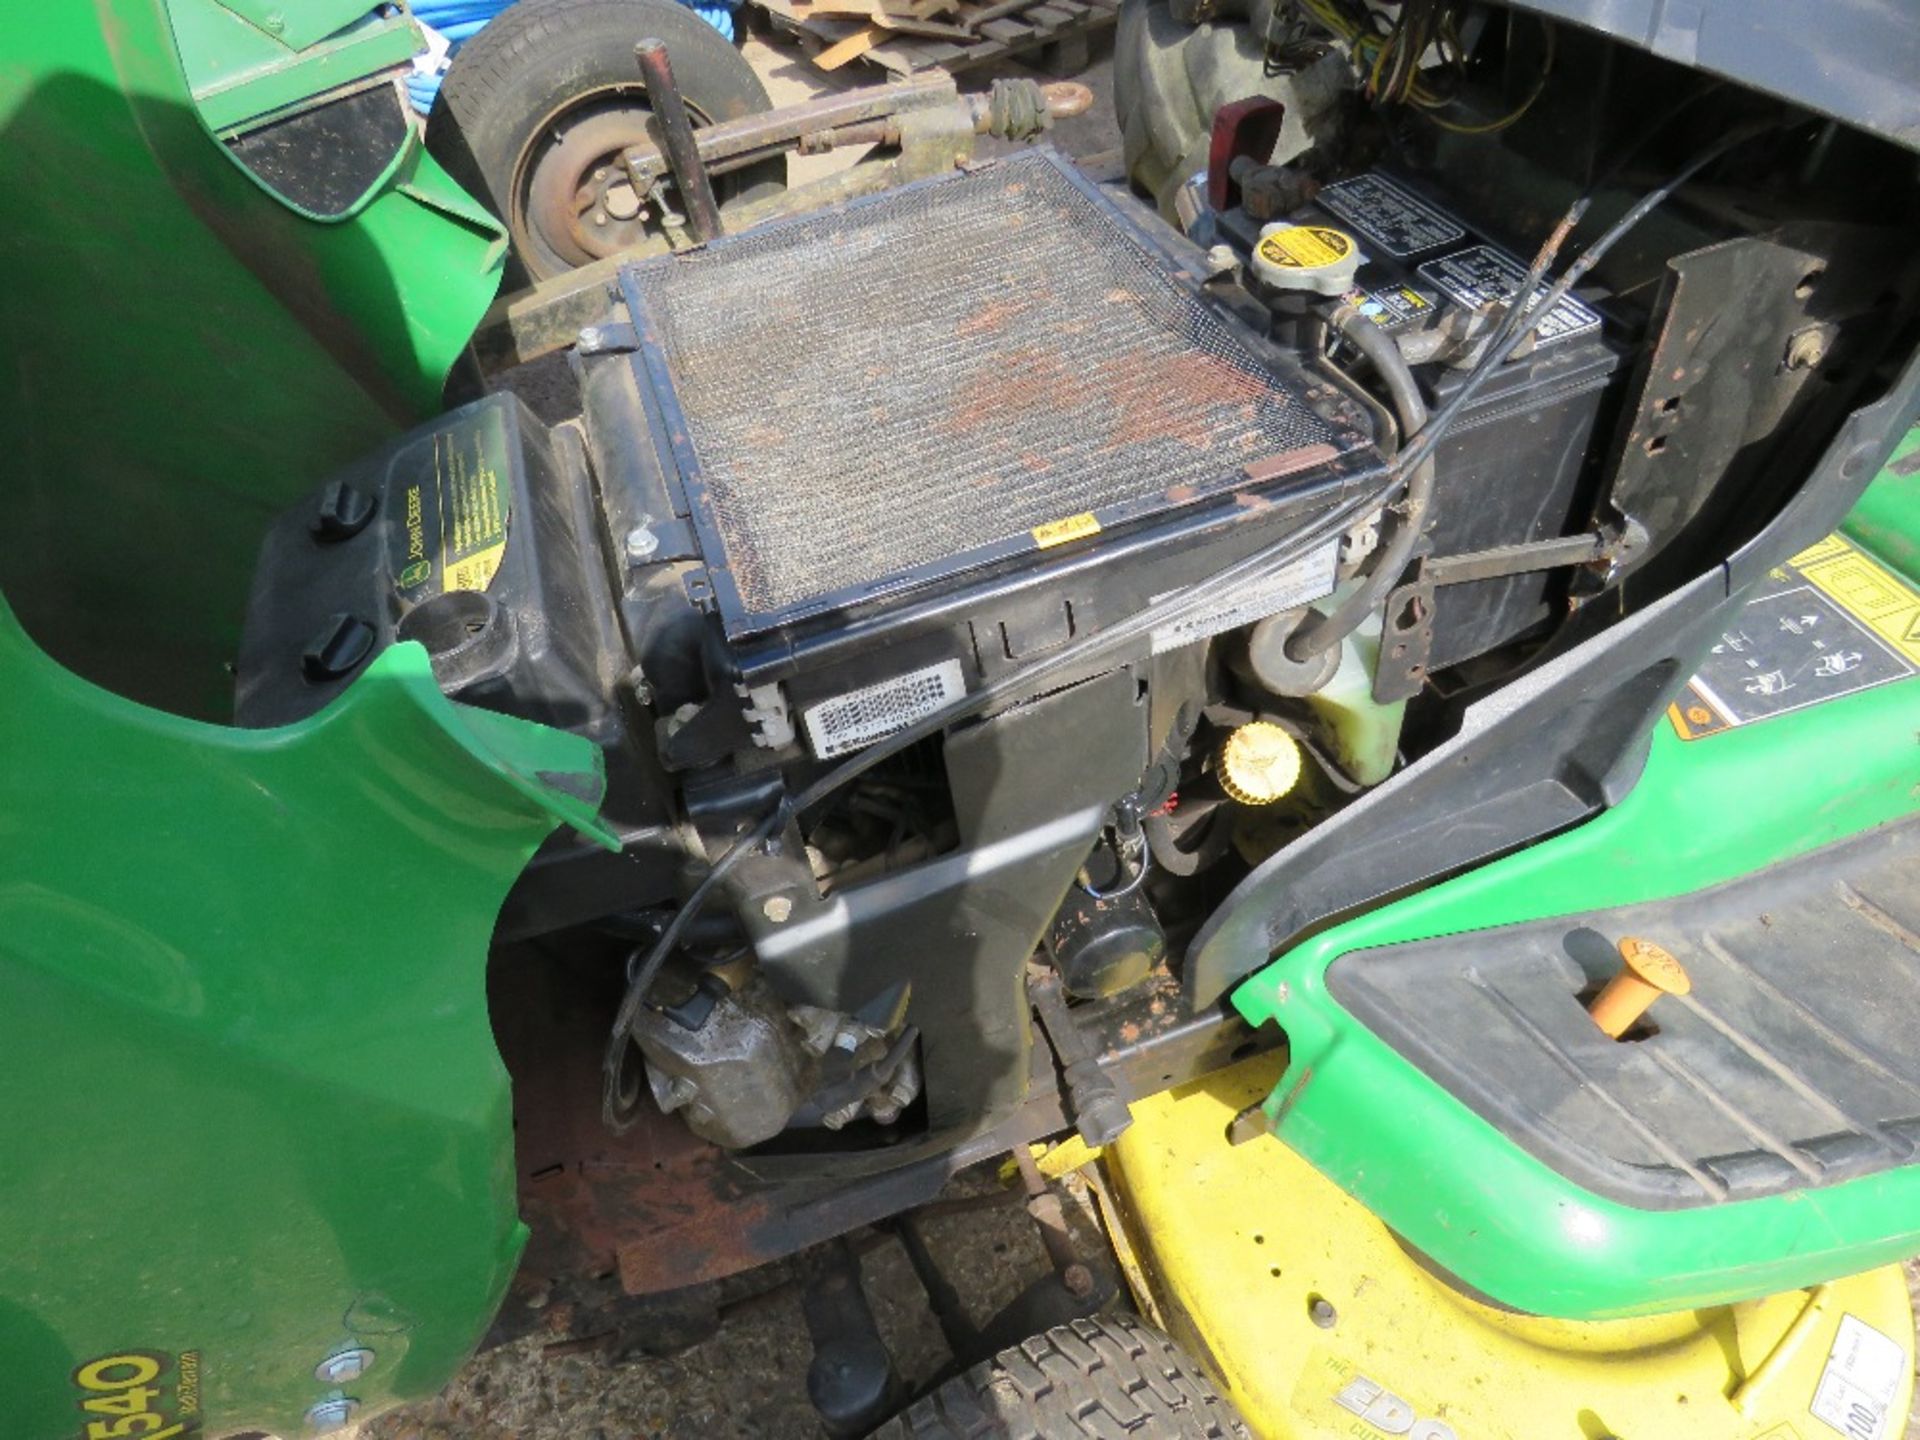 JOHN DEERE X540 PROFESSIONAL RIDE ON PETROL MOWER. PREVIOUS COUNCIL USEAGE. STRAIGHT FROM STORAGE, - Image 3 of 5